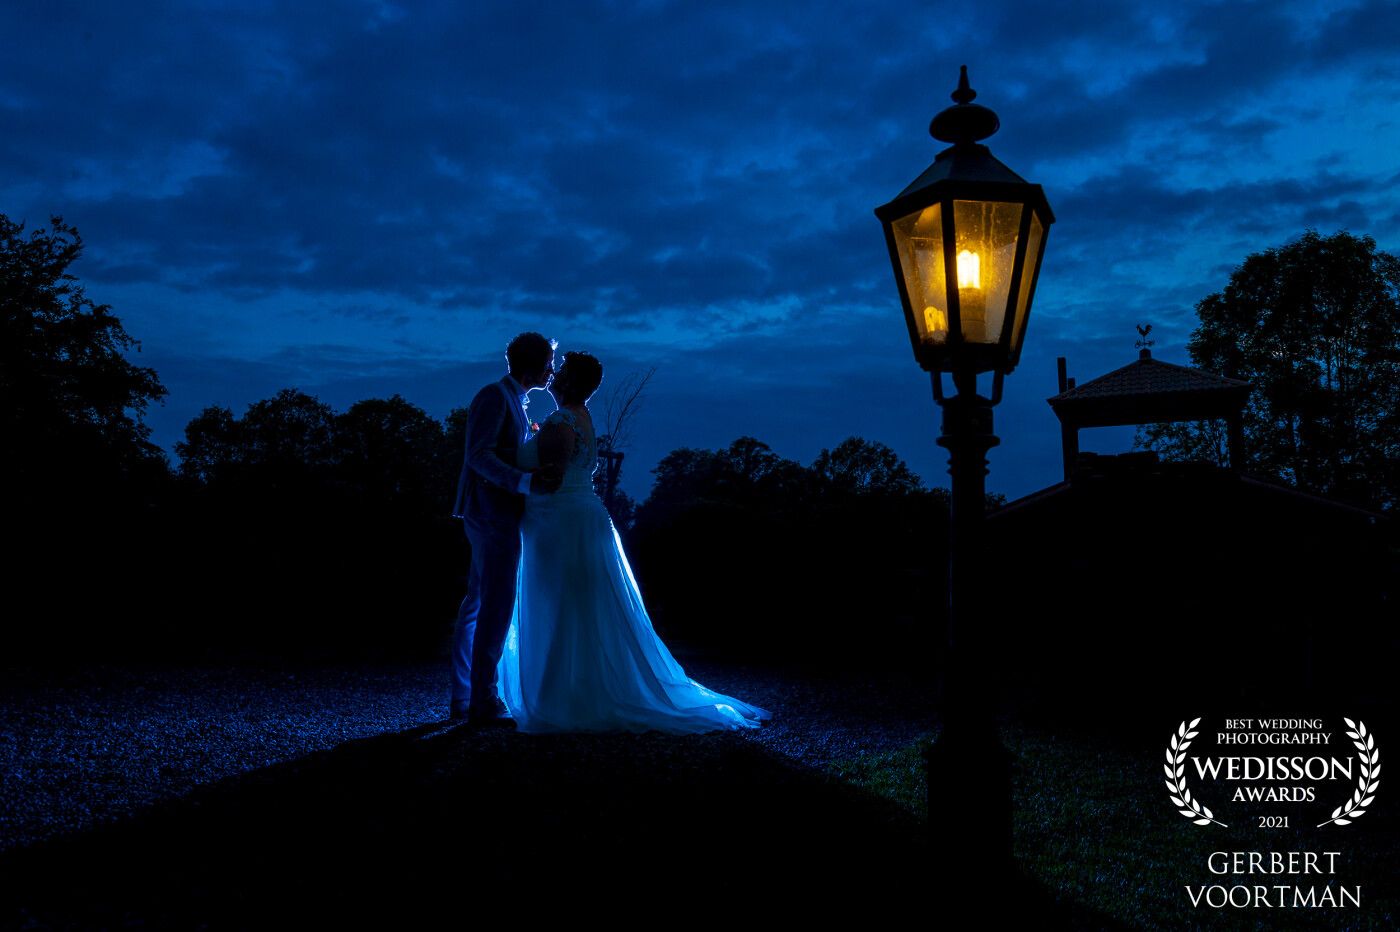 After a great great weddingday at Het Rheins in Enter, the Netherlands, we had a blue hour and take the opertunity to create a special shot with some flashes while all guest where watching. Anne-Marie and Martijn, thanks a lot, you're amazing people!